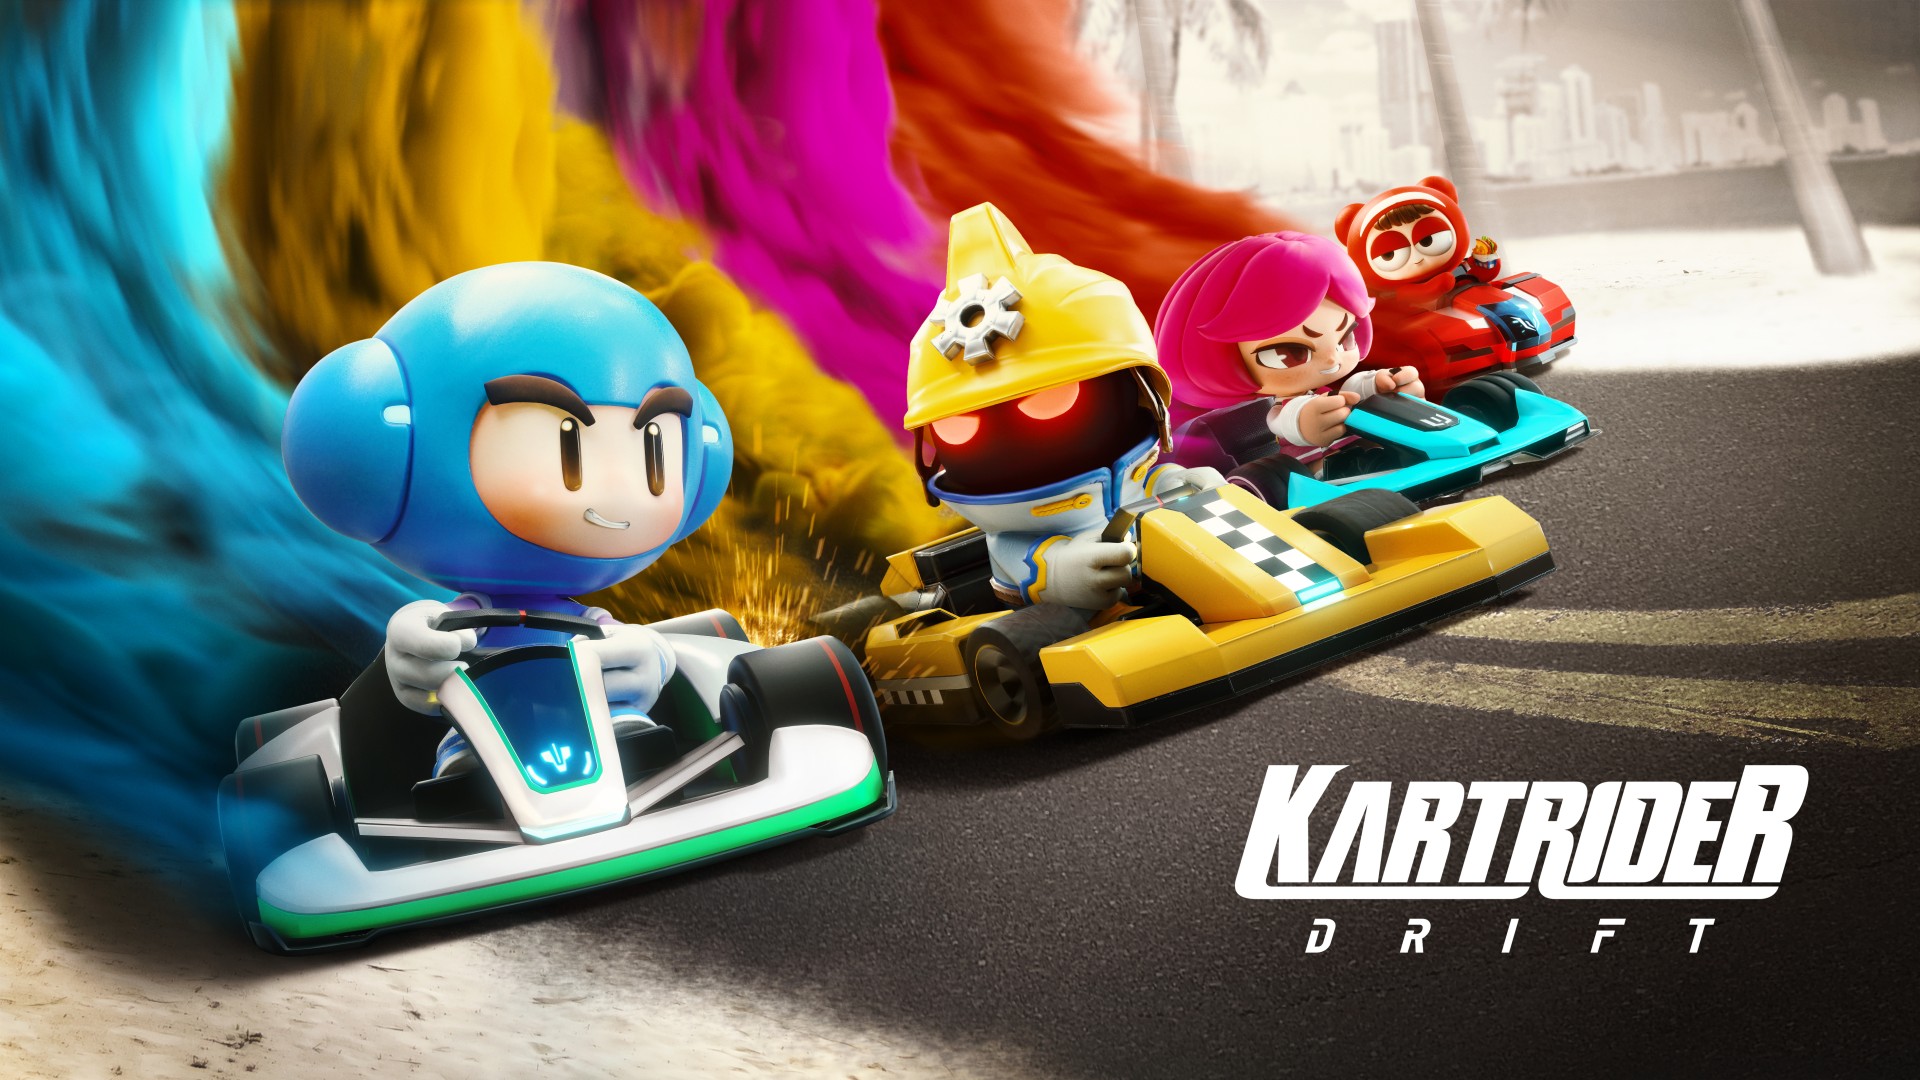 How Kartrider: Drift Teamed Up With Blackpink For The Ultimate K-Pop  Crossover - Xbox Wire